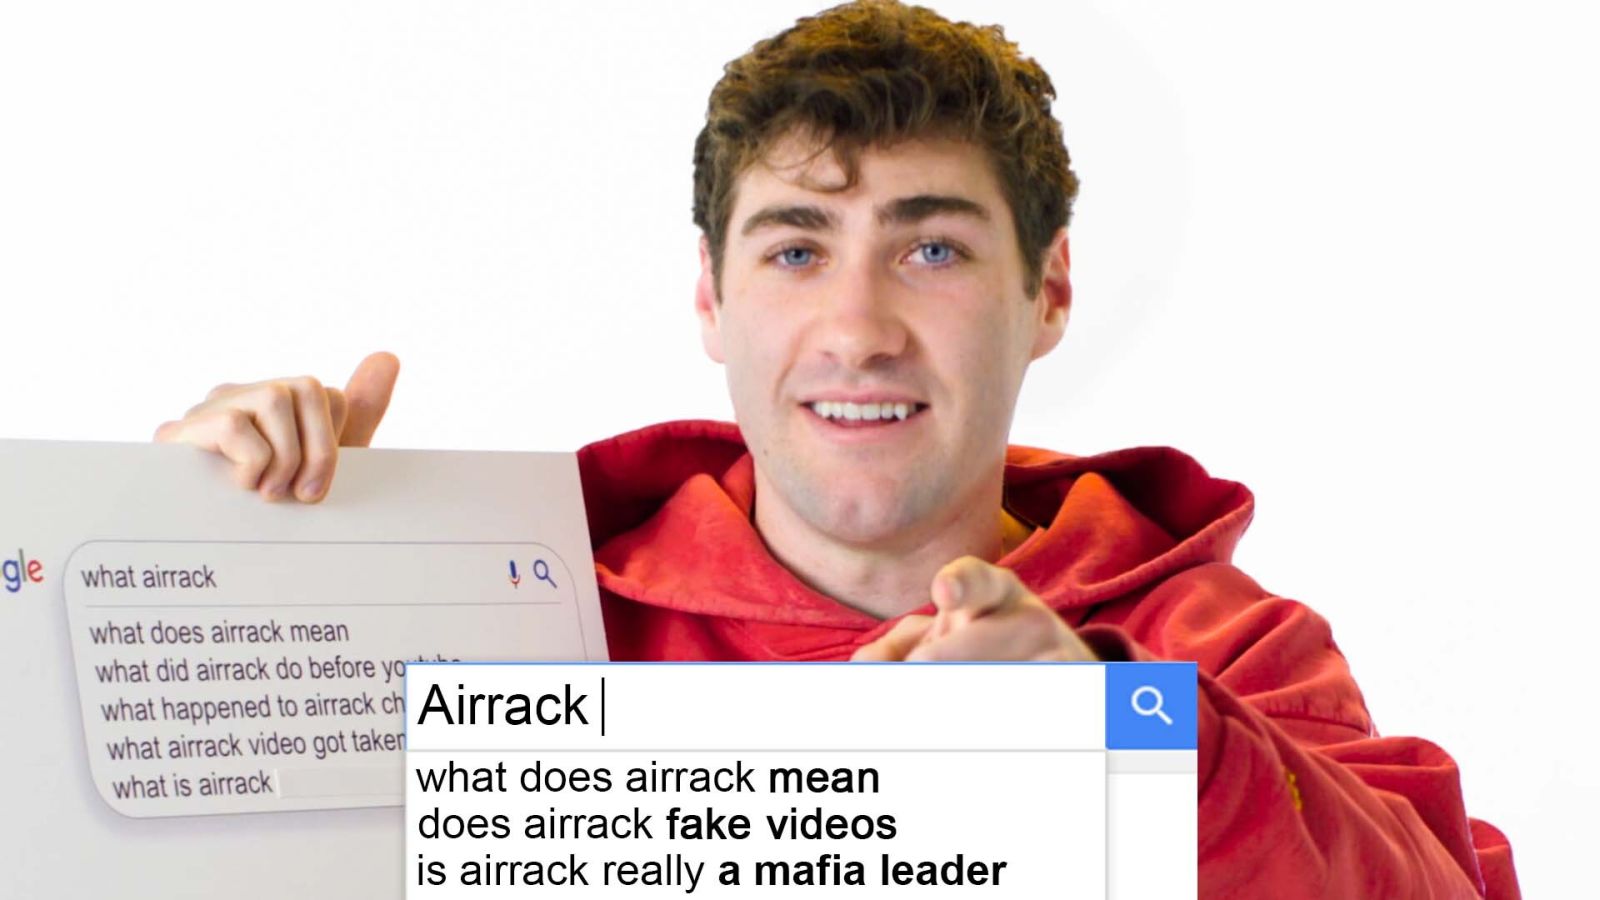 Airrack Answers the Web's Most Searched Questions